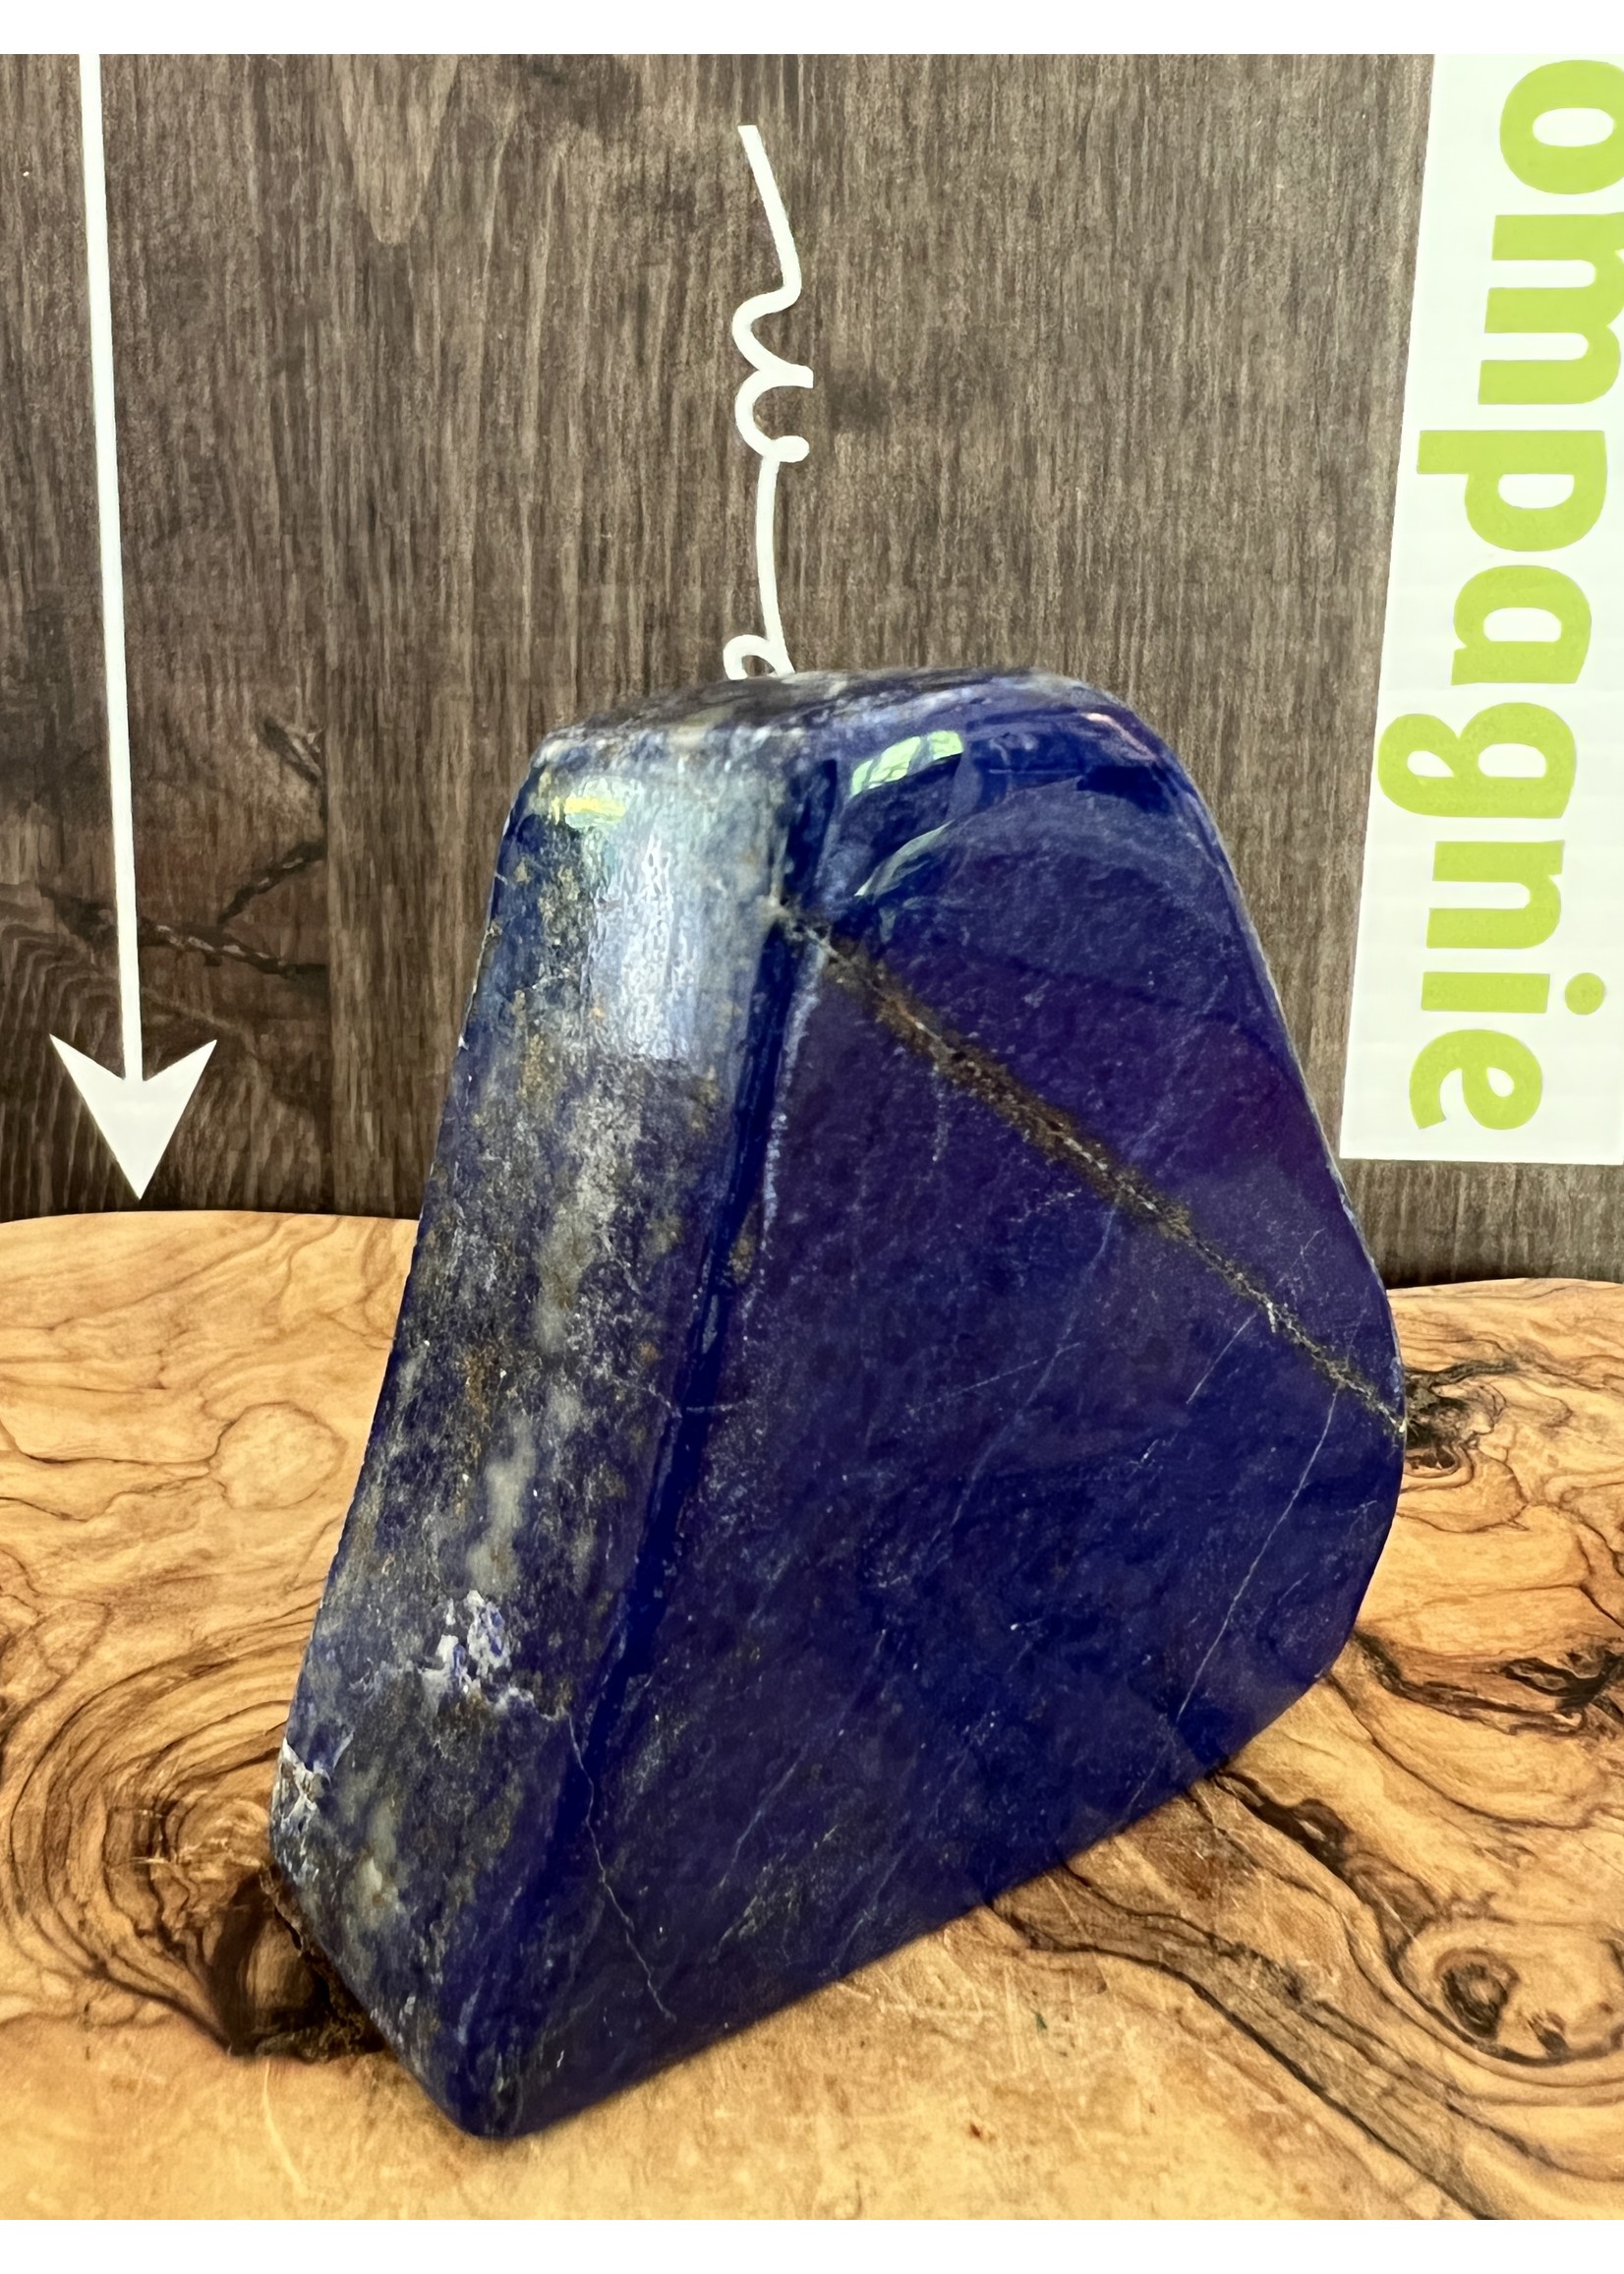 attractive piece of lapis lazuli freeform, beneficial for the respiratory system, cleansing organs and the nervous system